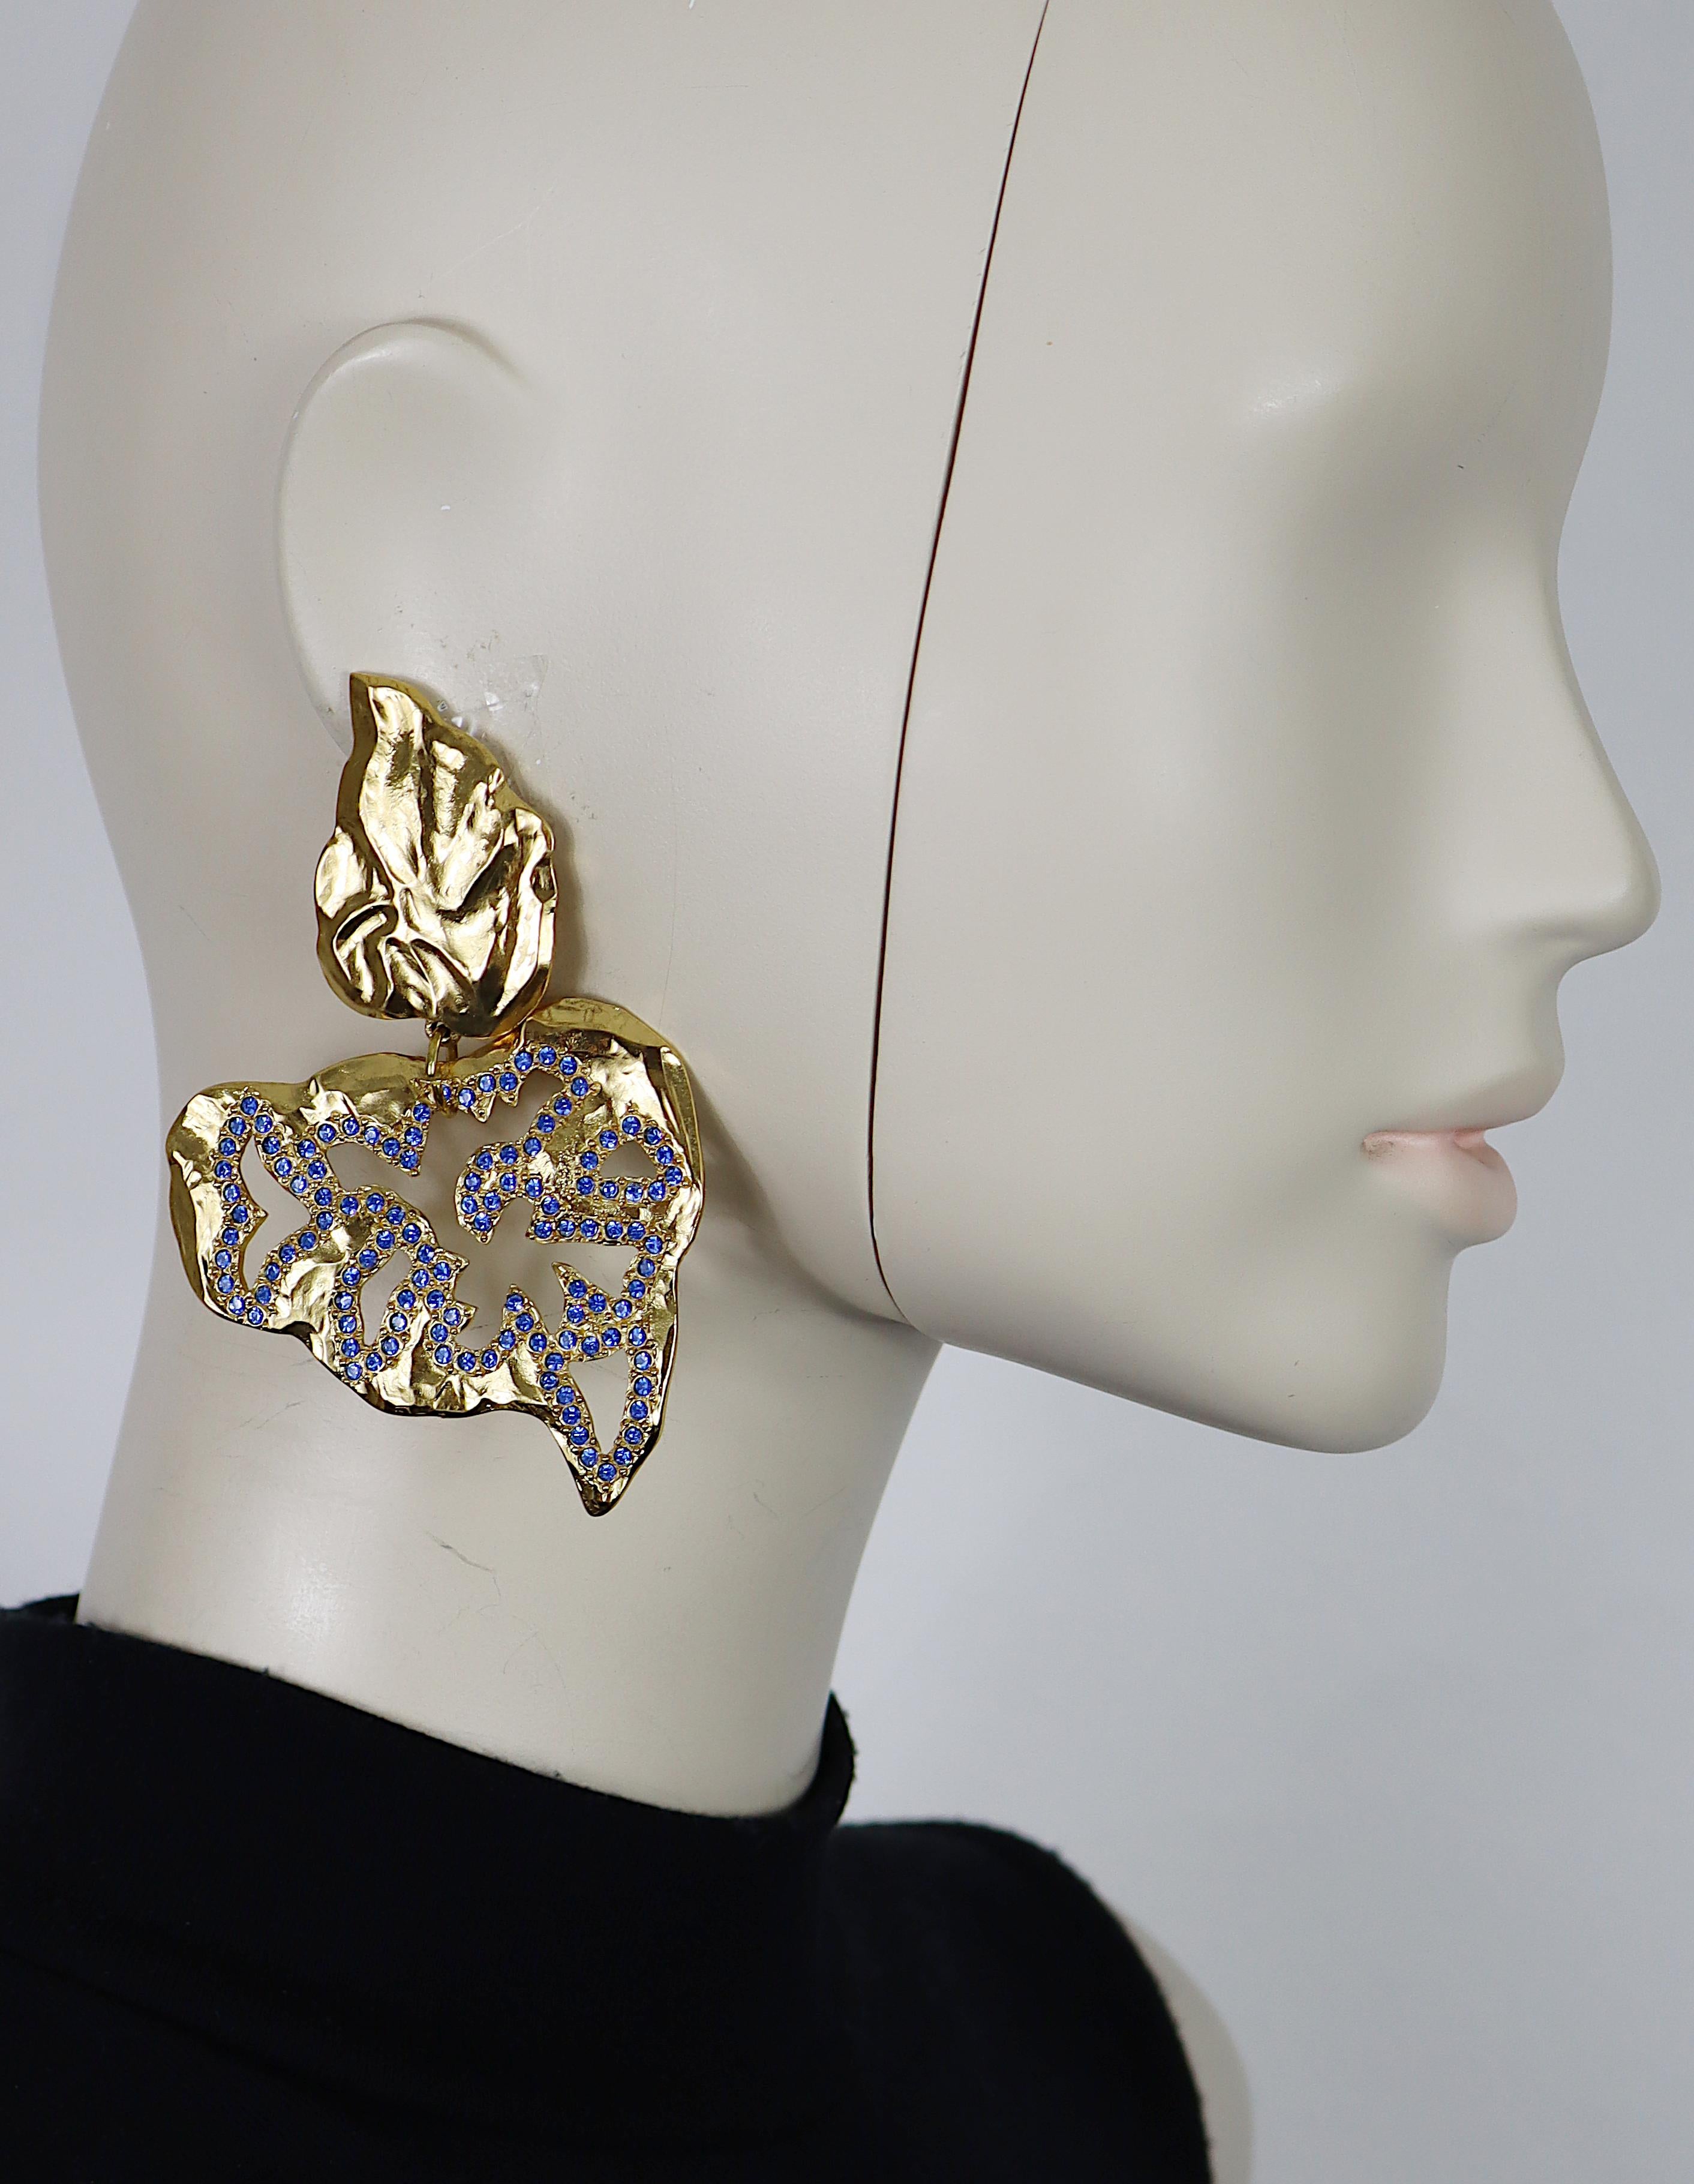 YVES SAINT LAURENT vintage massive textured gold tone openwork dangling earrings (clip-on) embellished with blue colour crystals.

Embossed YSL Made in France.

Indicative measurements : max. height approx. 9.5 cm (3.74 inches) / max. width approx.